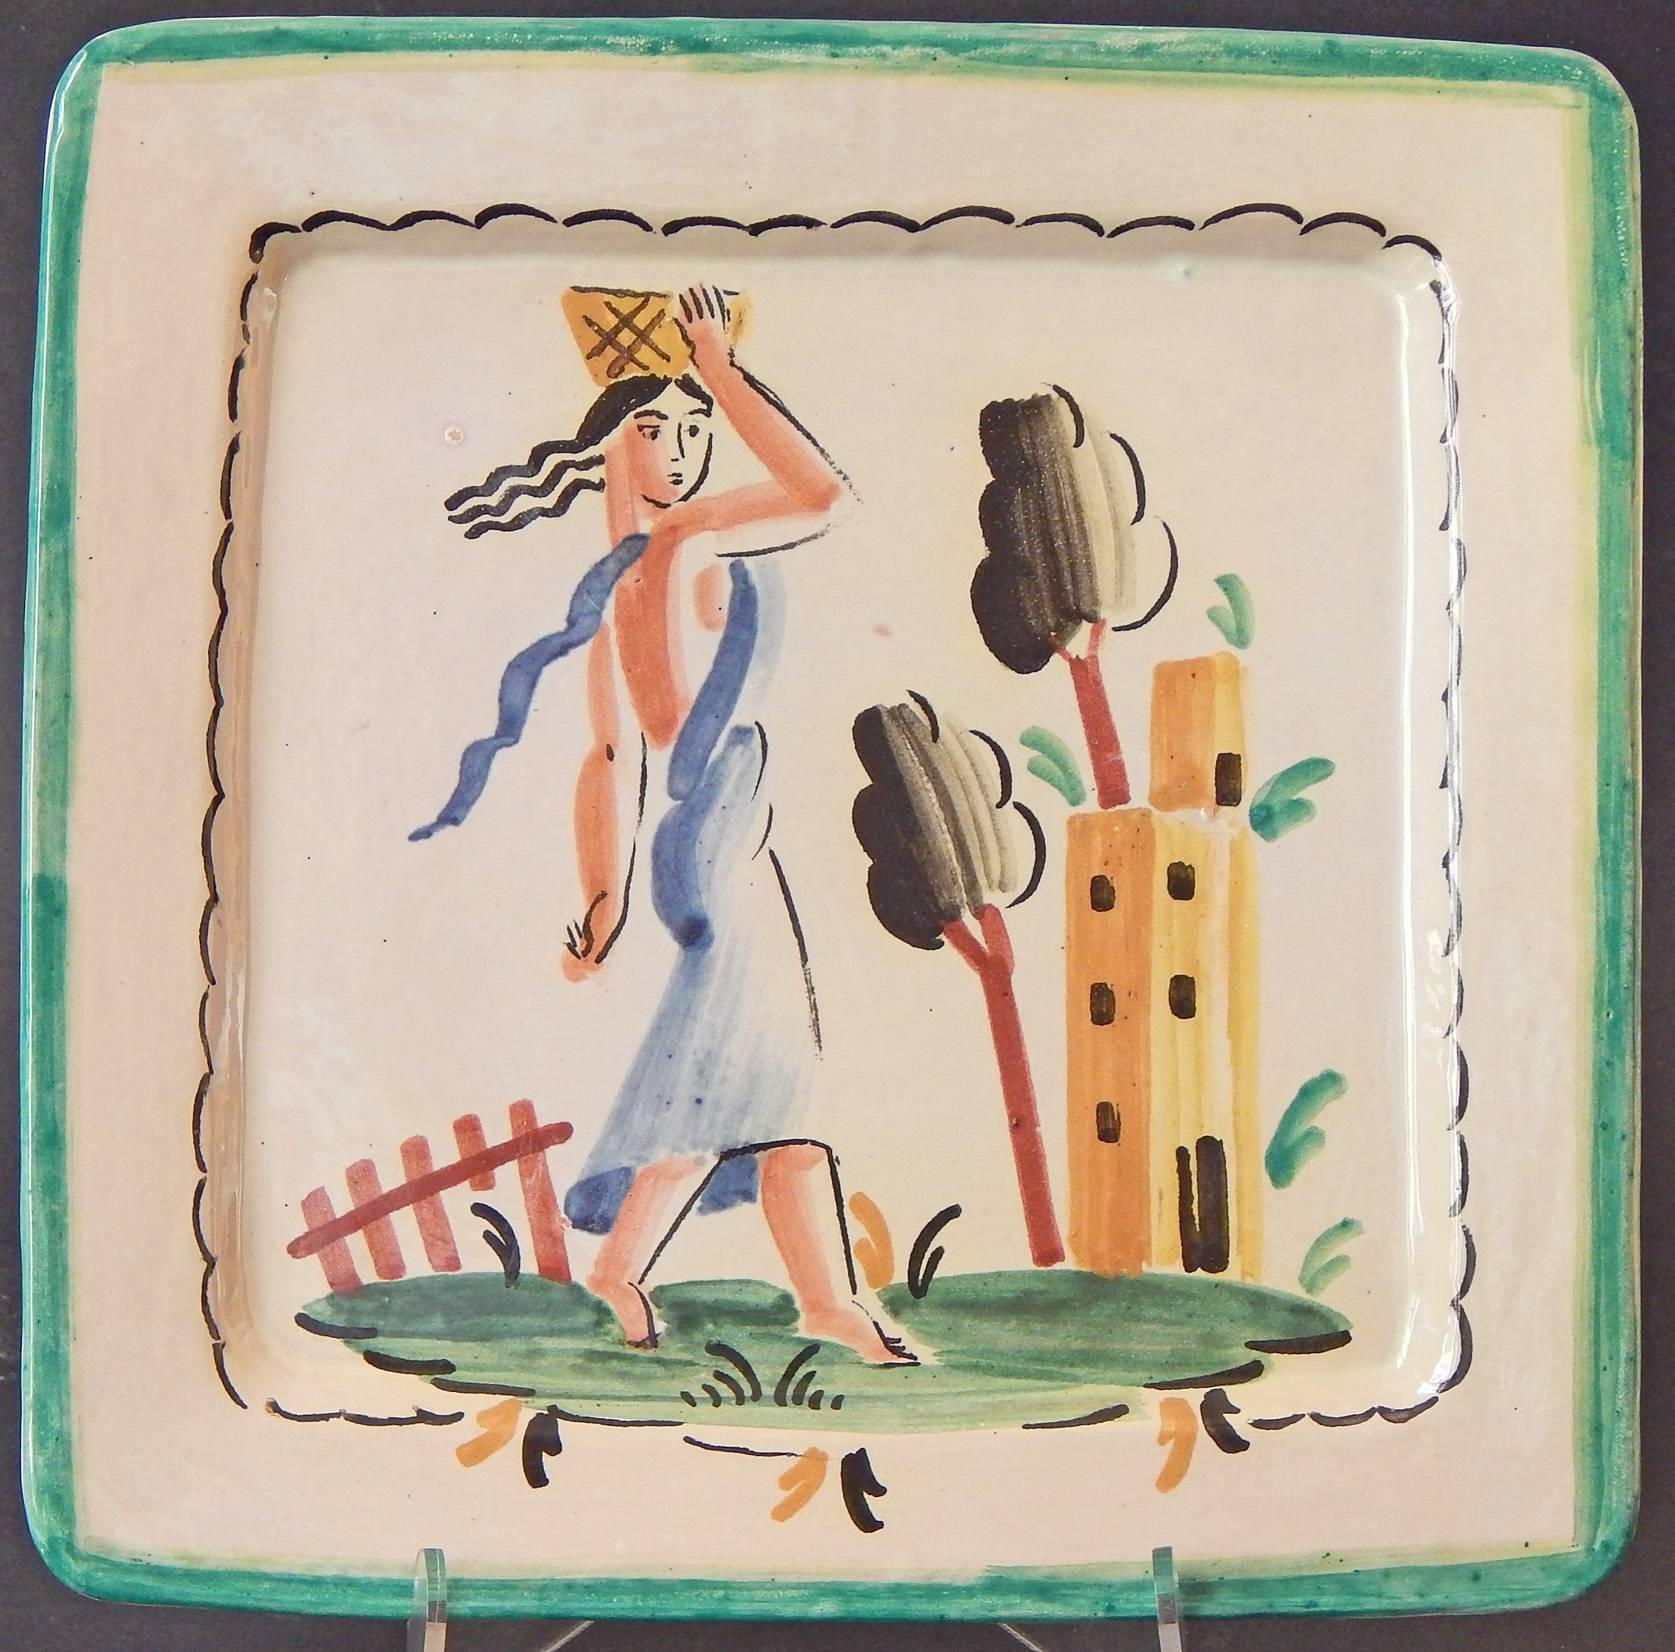 Painted with freshness and sophistication, this pair of Italian Art Deco plates depict elegant female figures, each balancing baskets on their heads, striding toward a tower in the distance.  One in a blue Classical robe, with her Art Deco hair